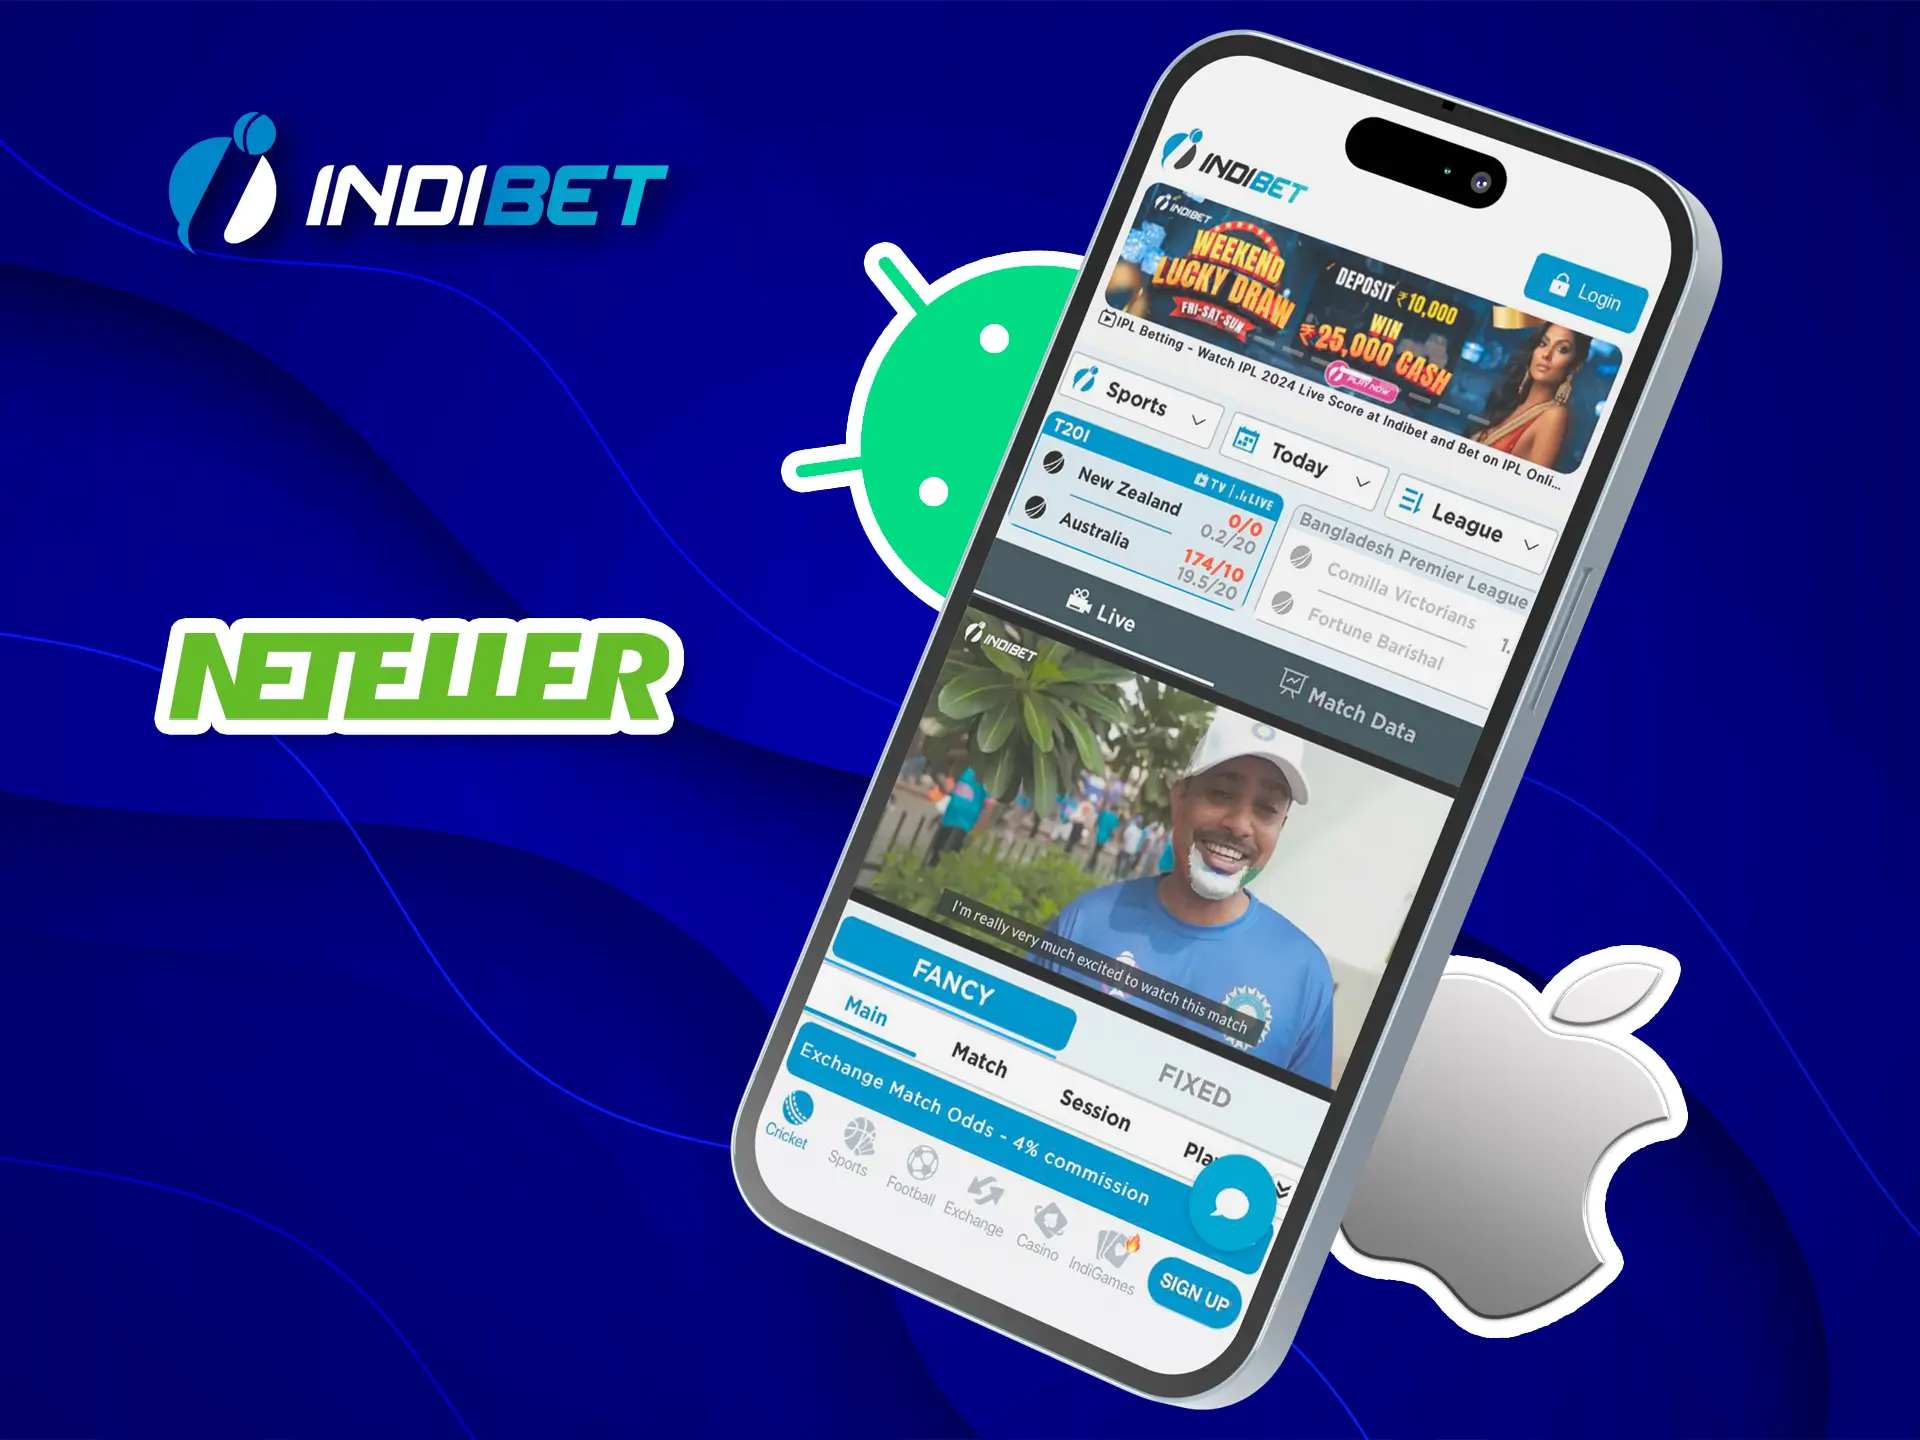 The Indibet app gives its customers access to the Neteller system from any mobile device.